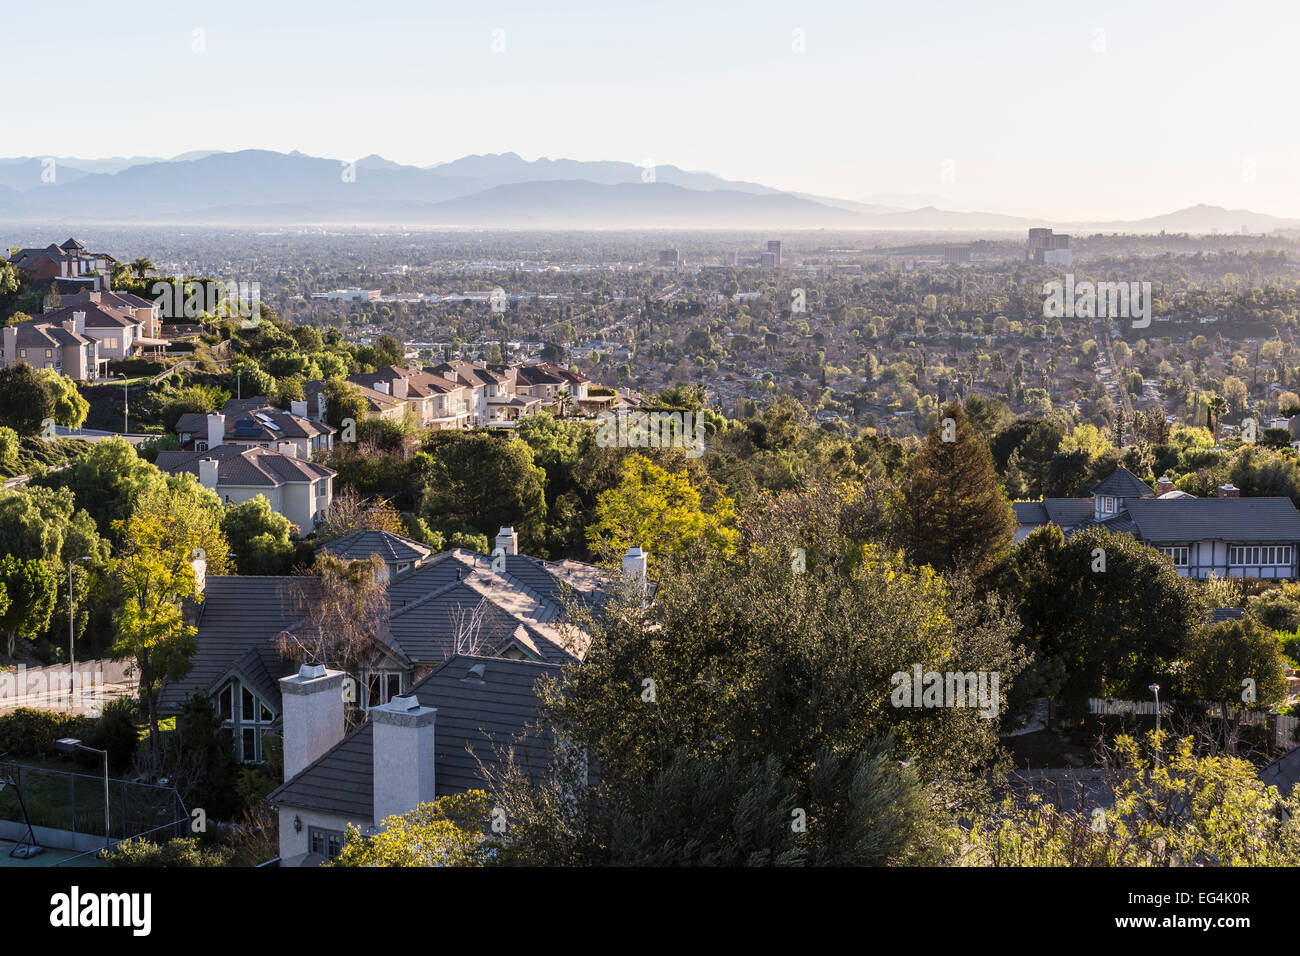 Hilltop view from the west edge of the San Fernando Valley in Los Angeles, California. Stock Photo